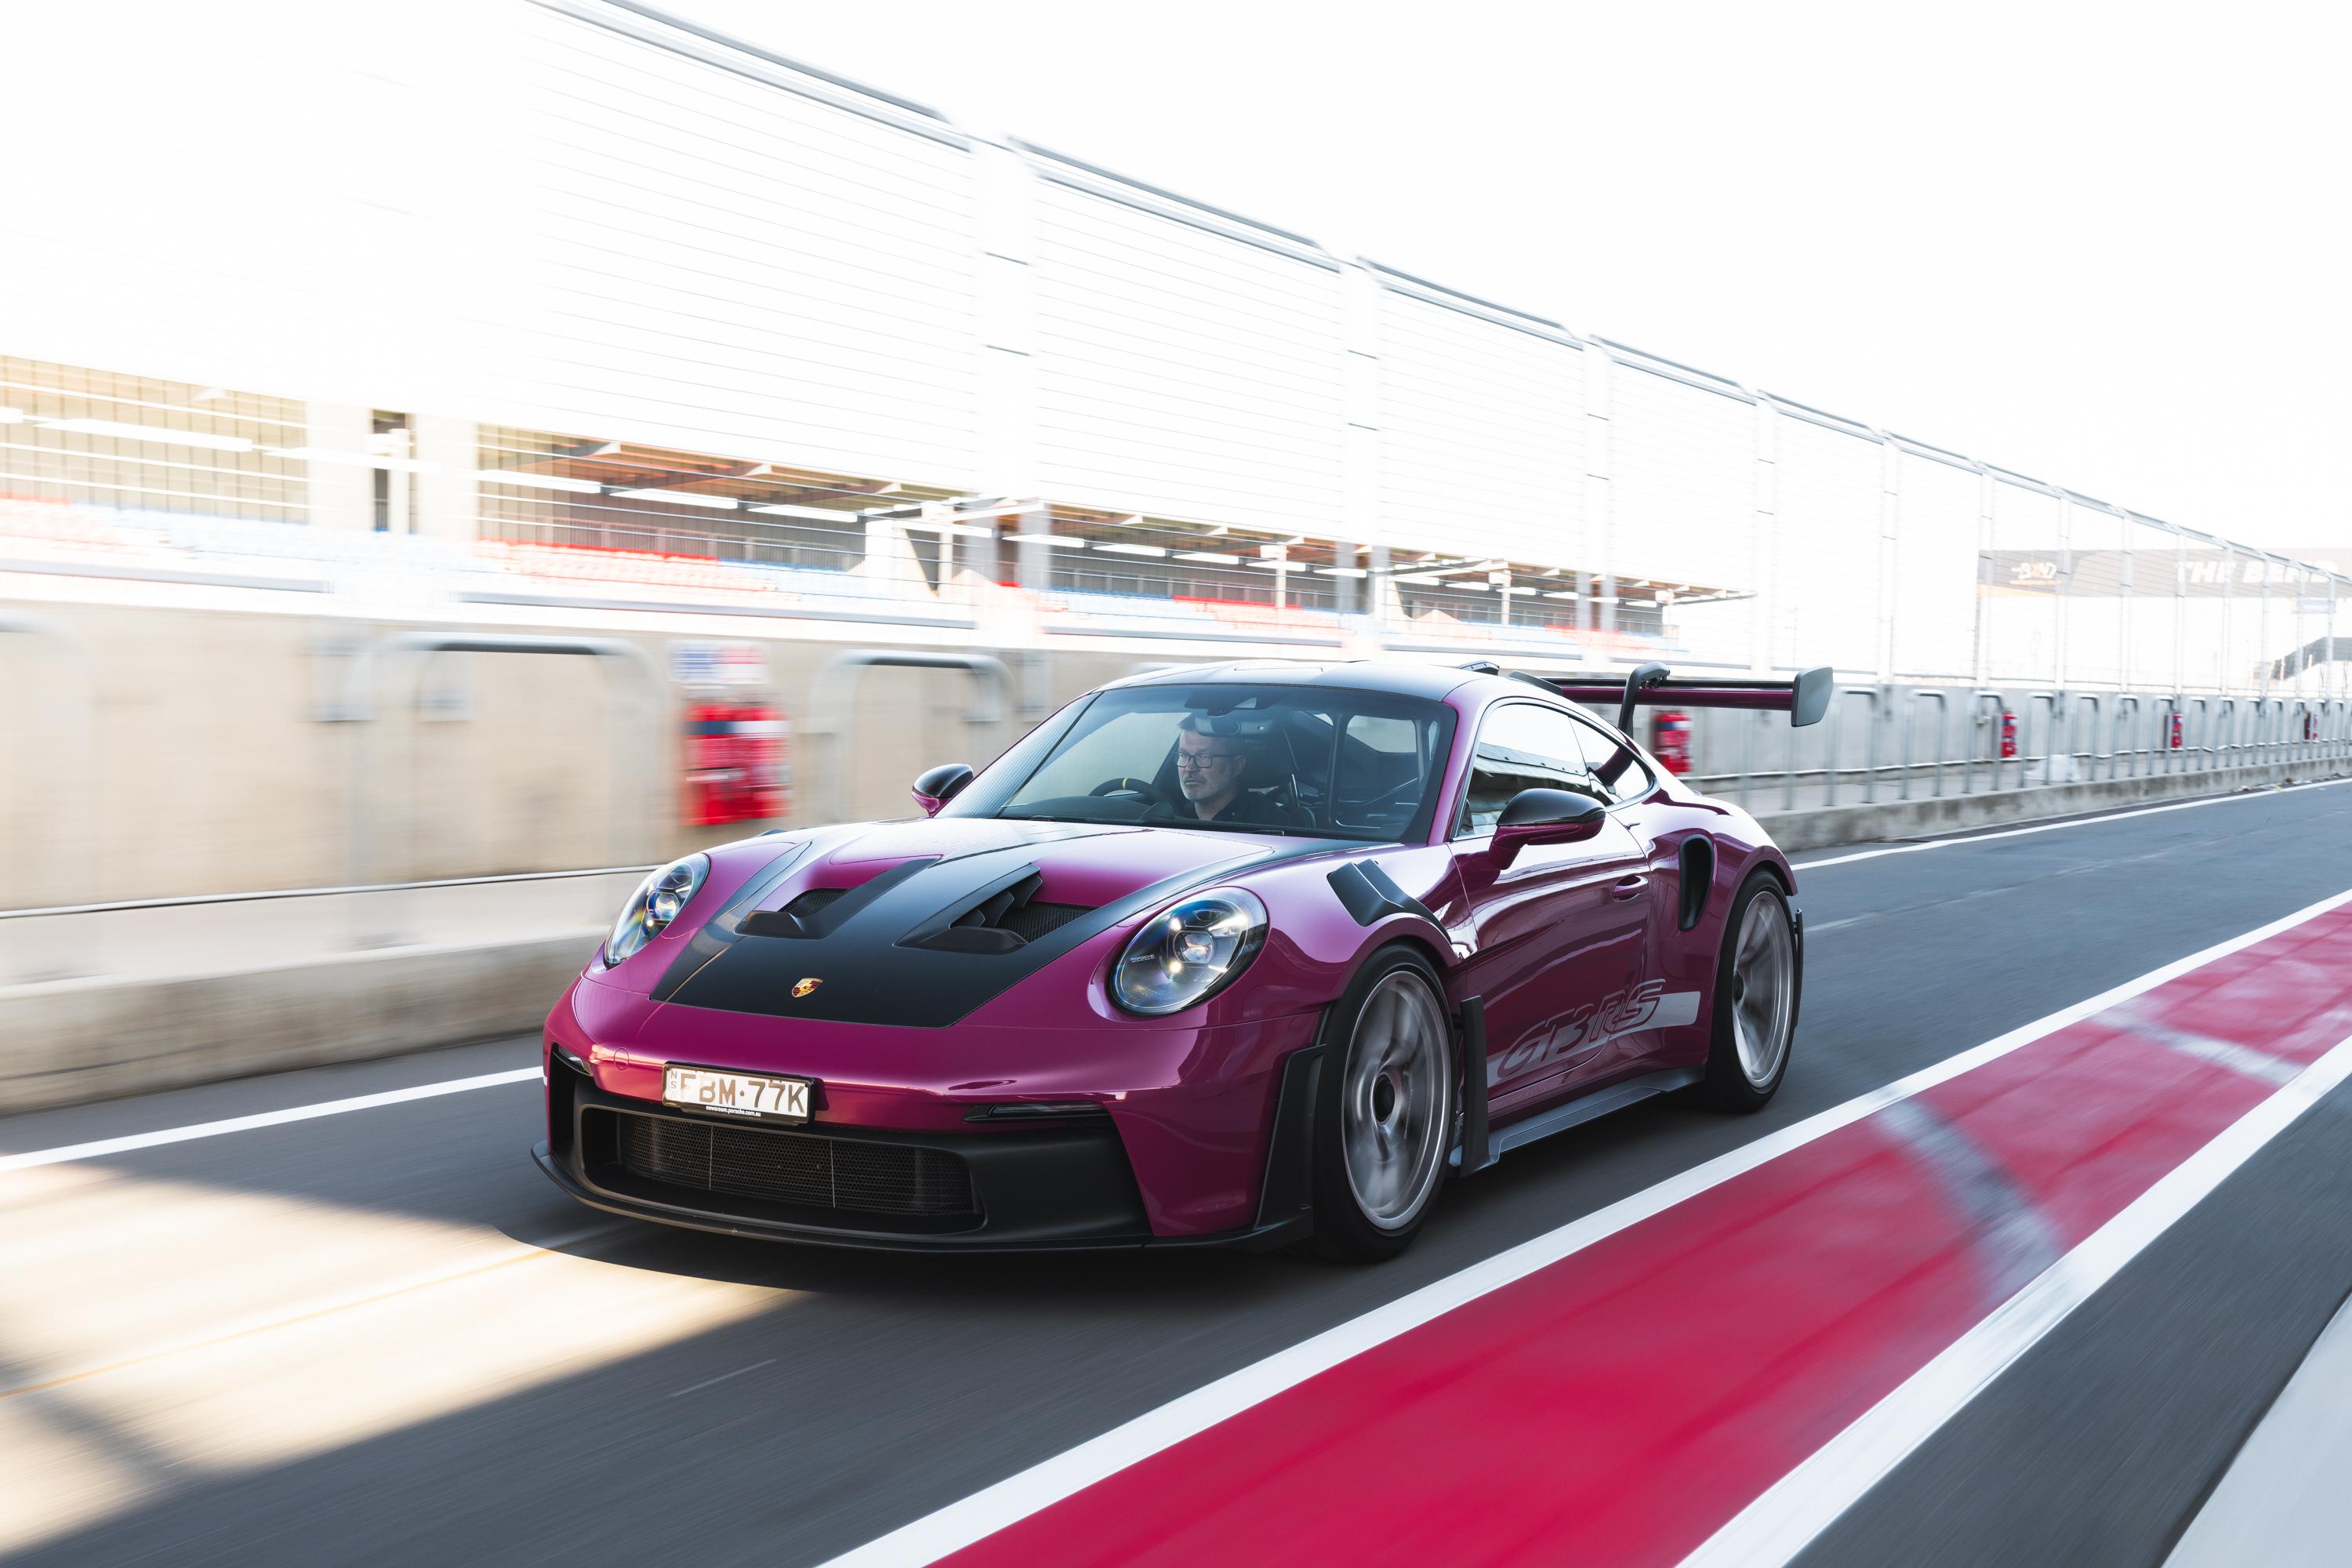 Porsche 911 GT3 RS review: there's good news and bad news - Driven Car Guide